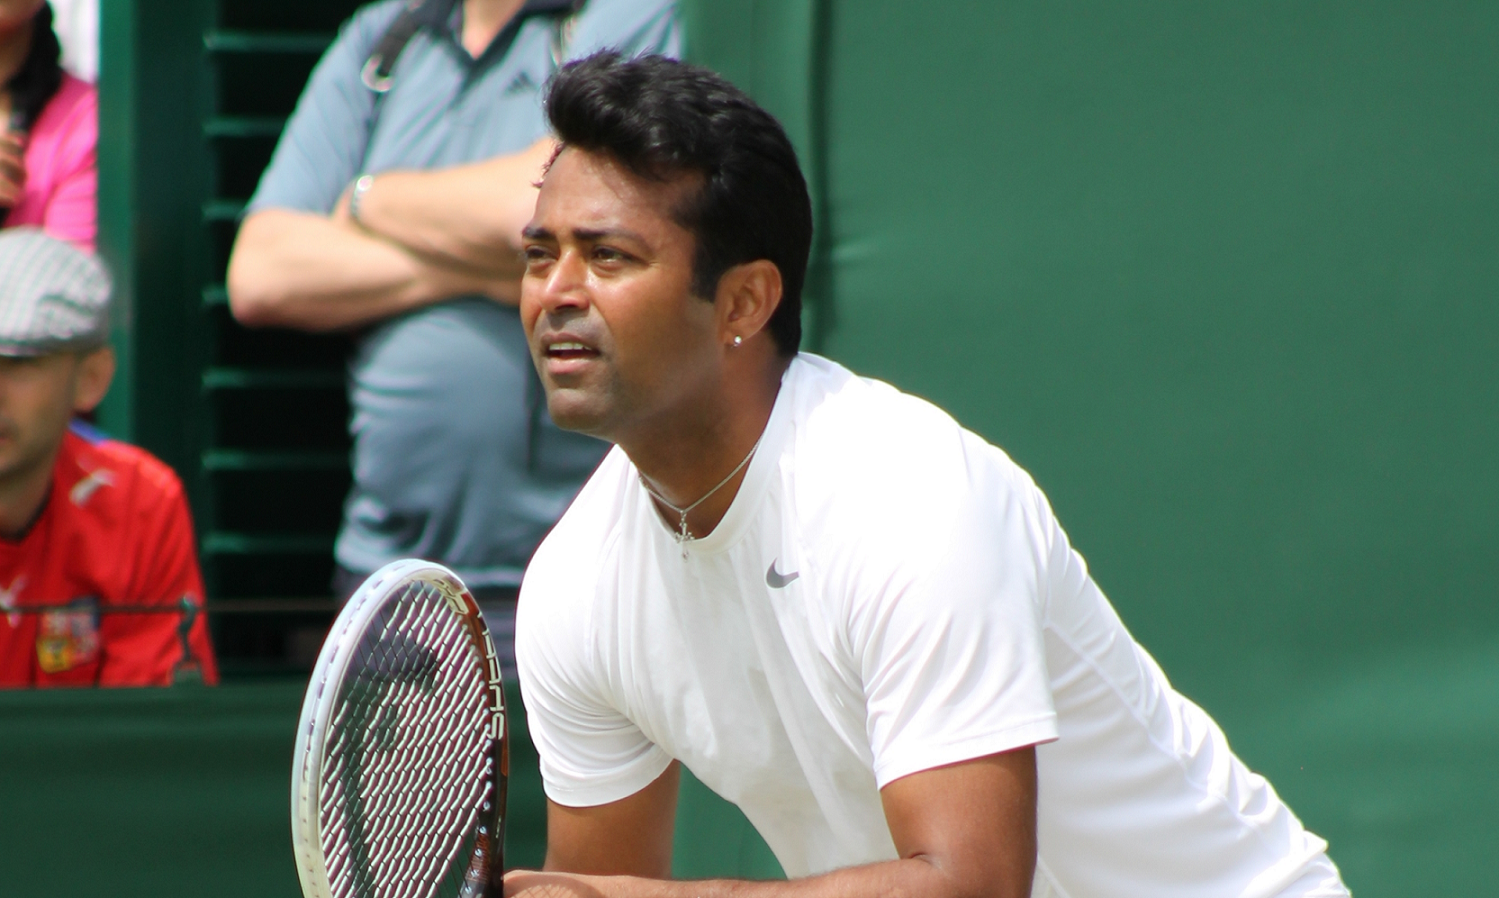 Here’s Why Leander Paes Is Regarded As India’s Best Tennis Player Ever